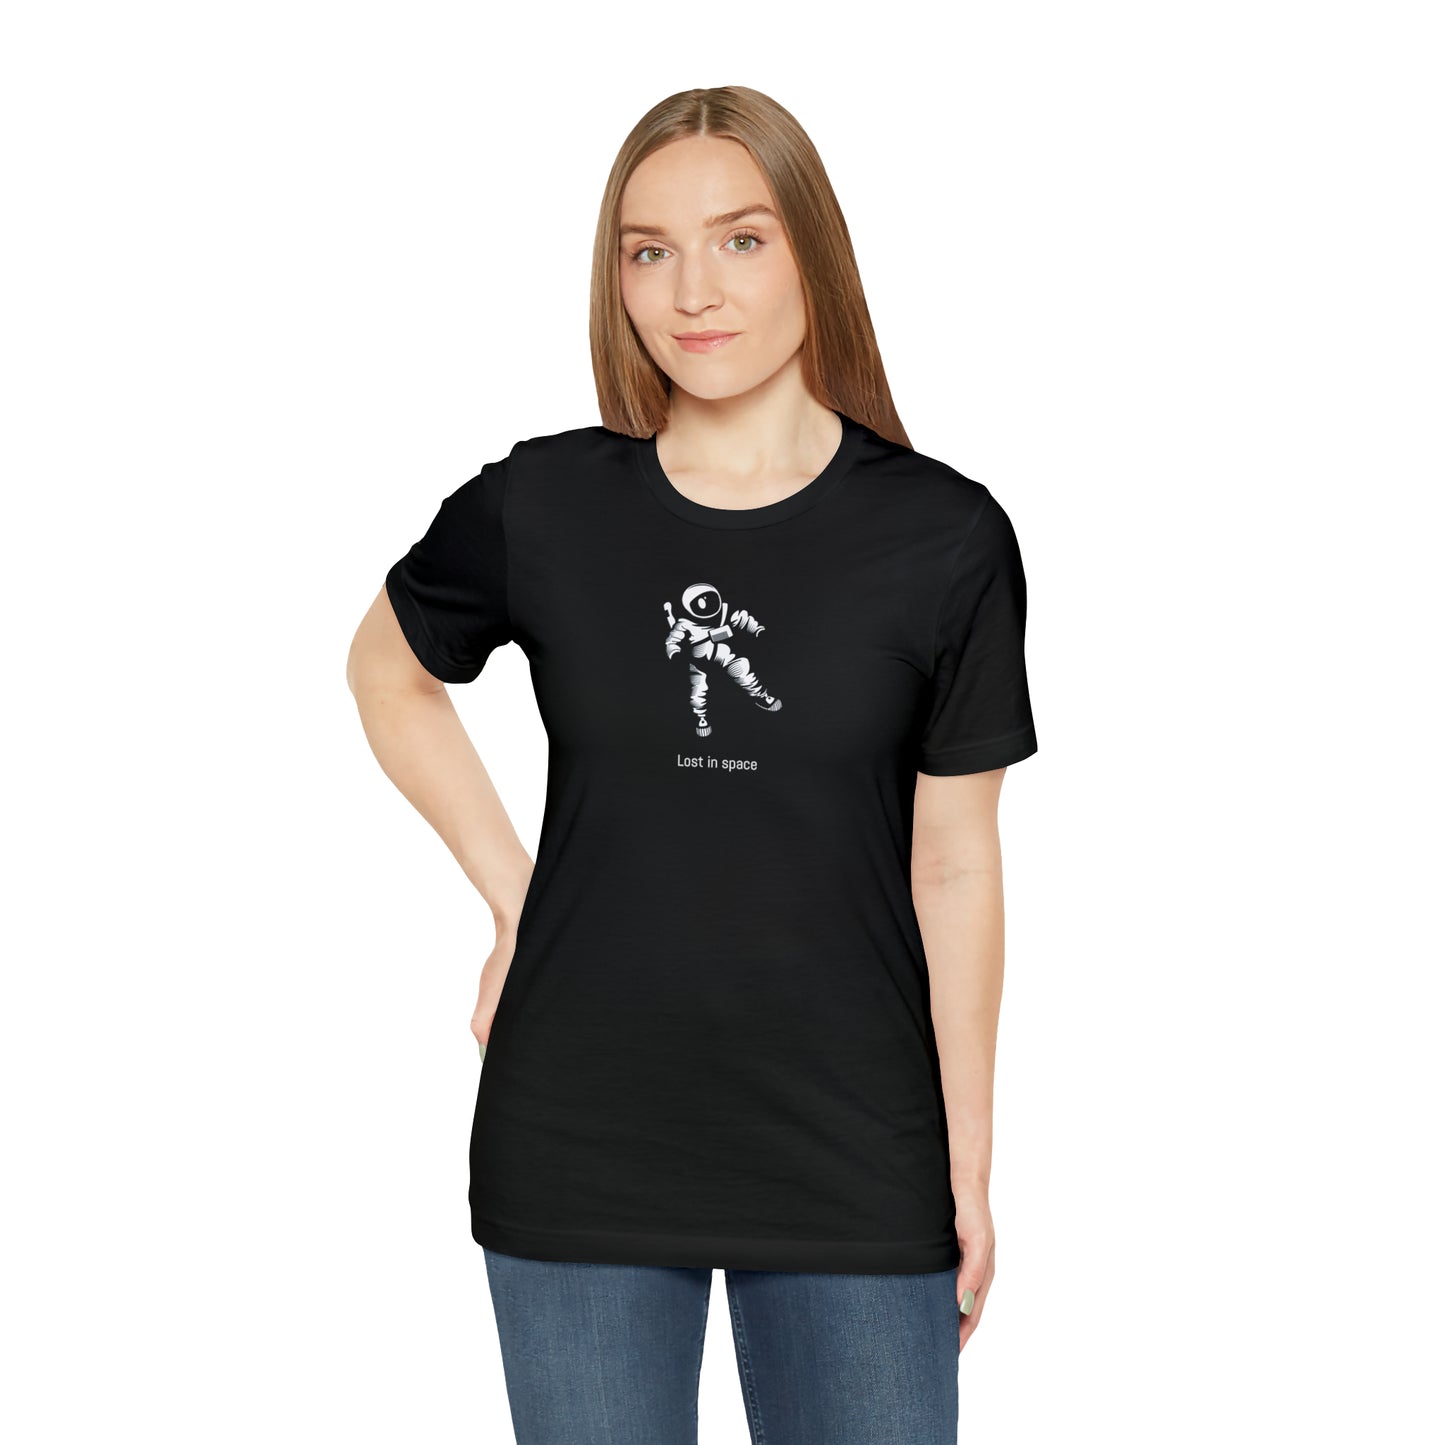 Astronomy Shirt - Lost in Space